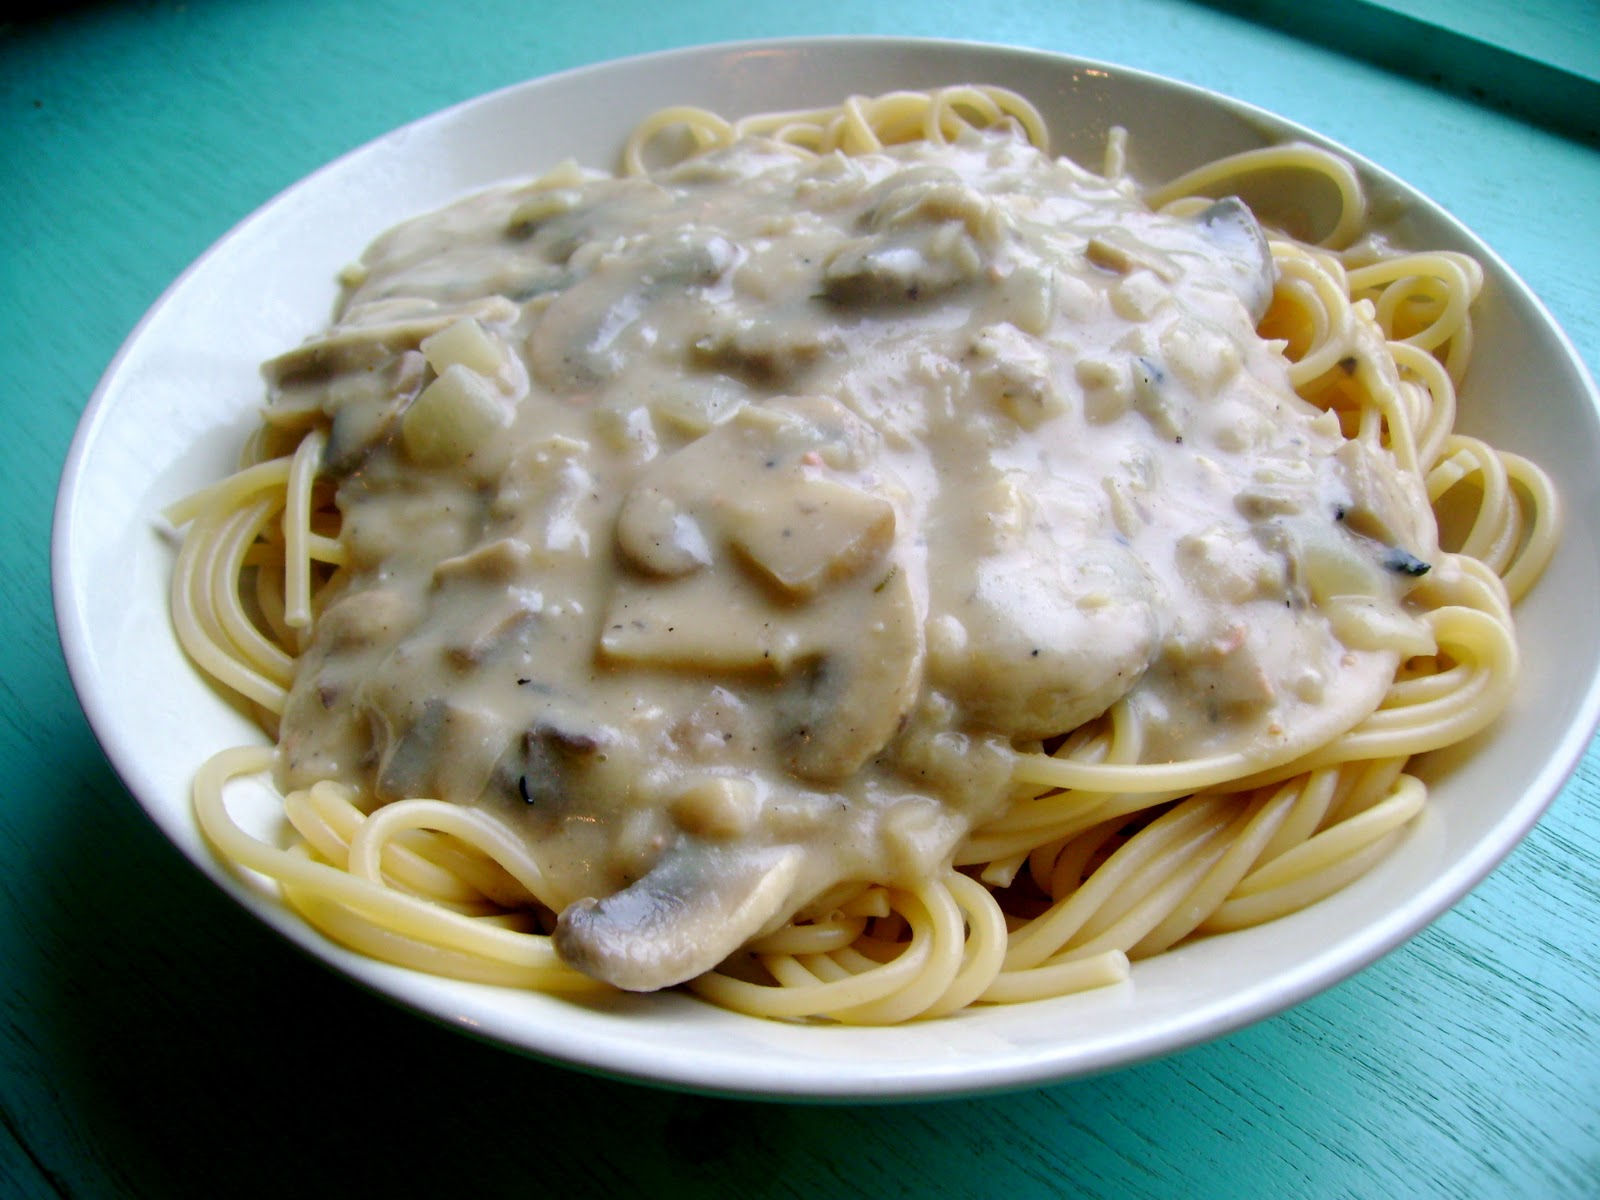 The Crabby Crafter: Cream of Mushroom Soup with Spaghetti